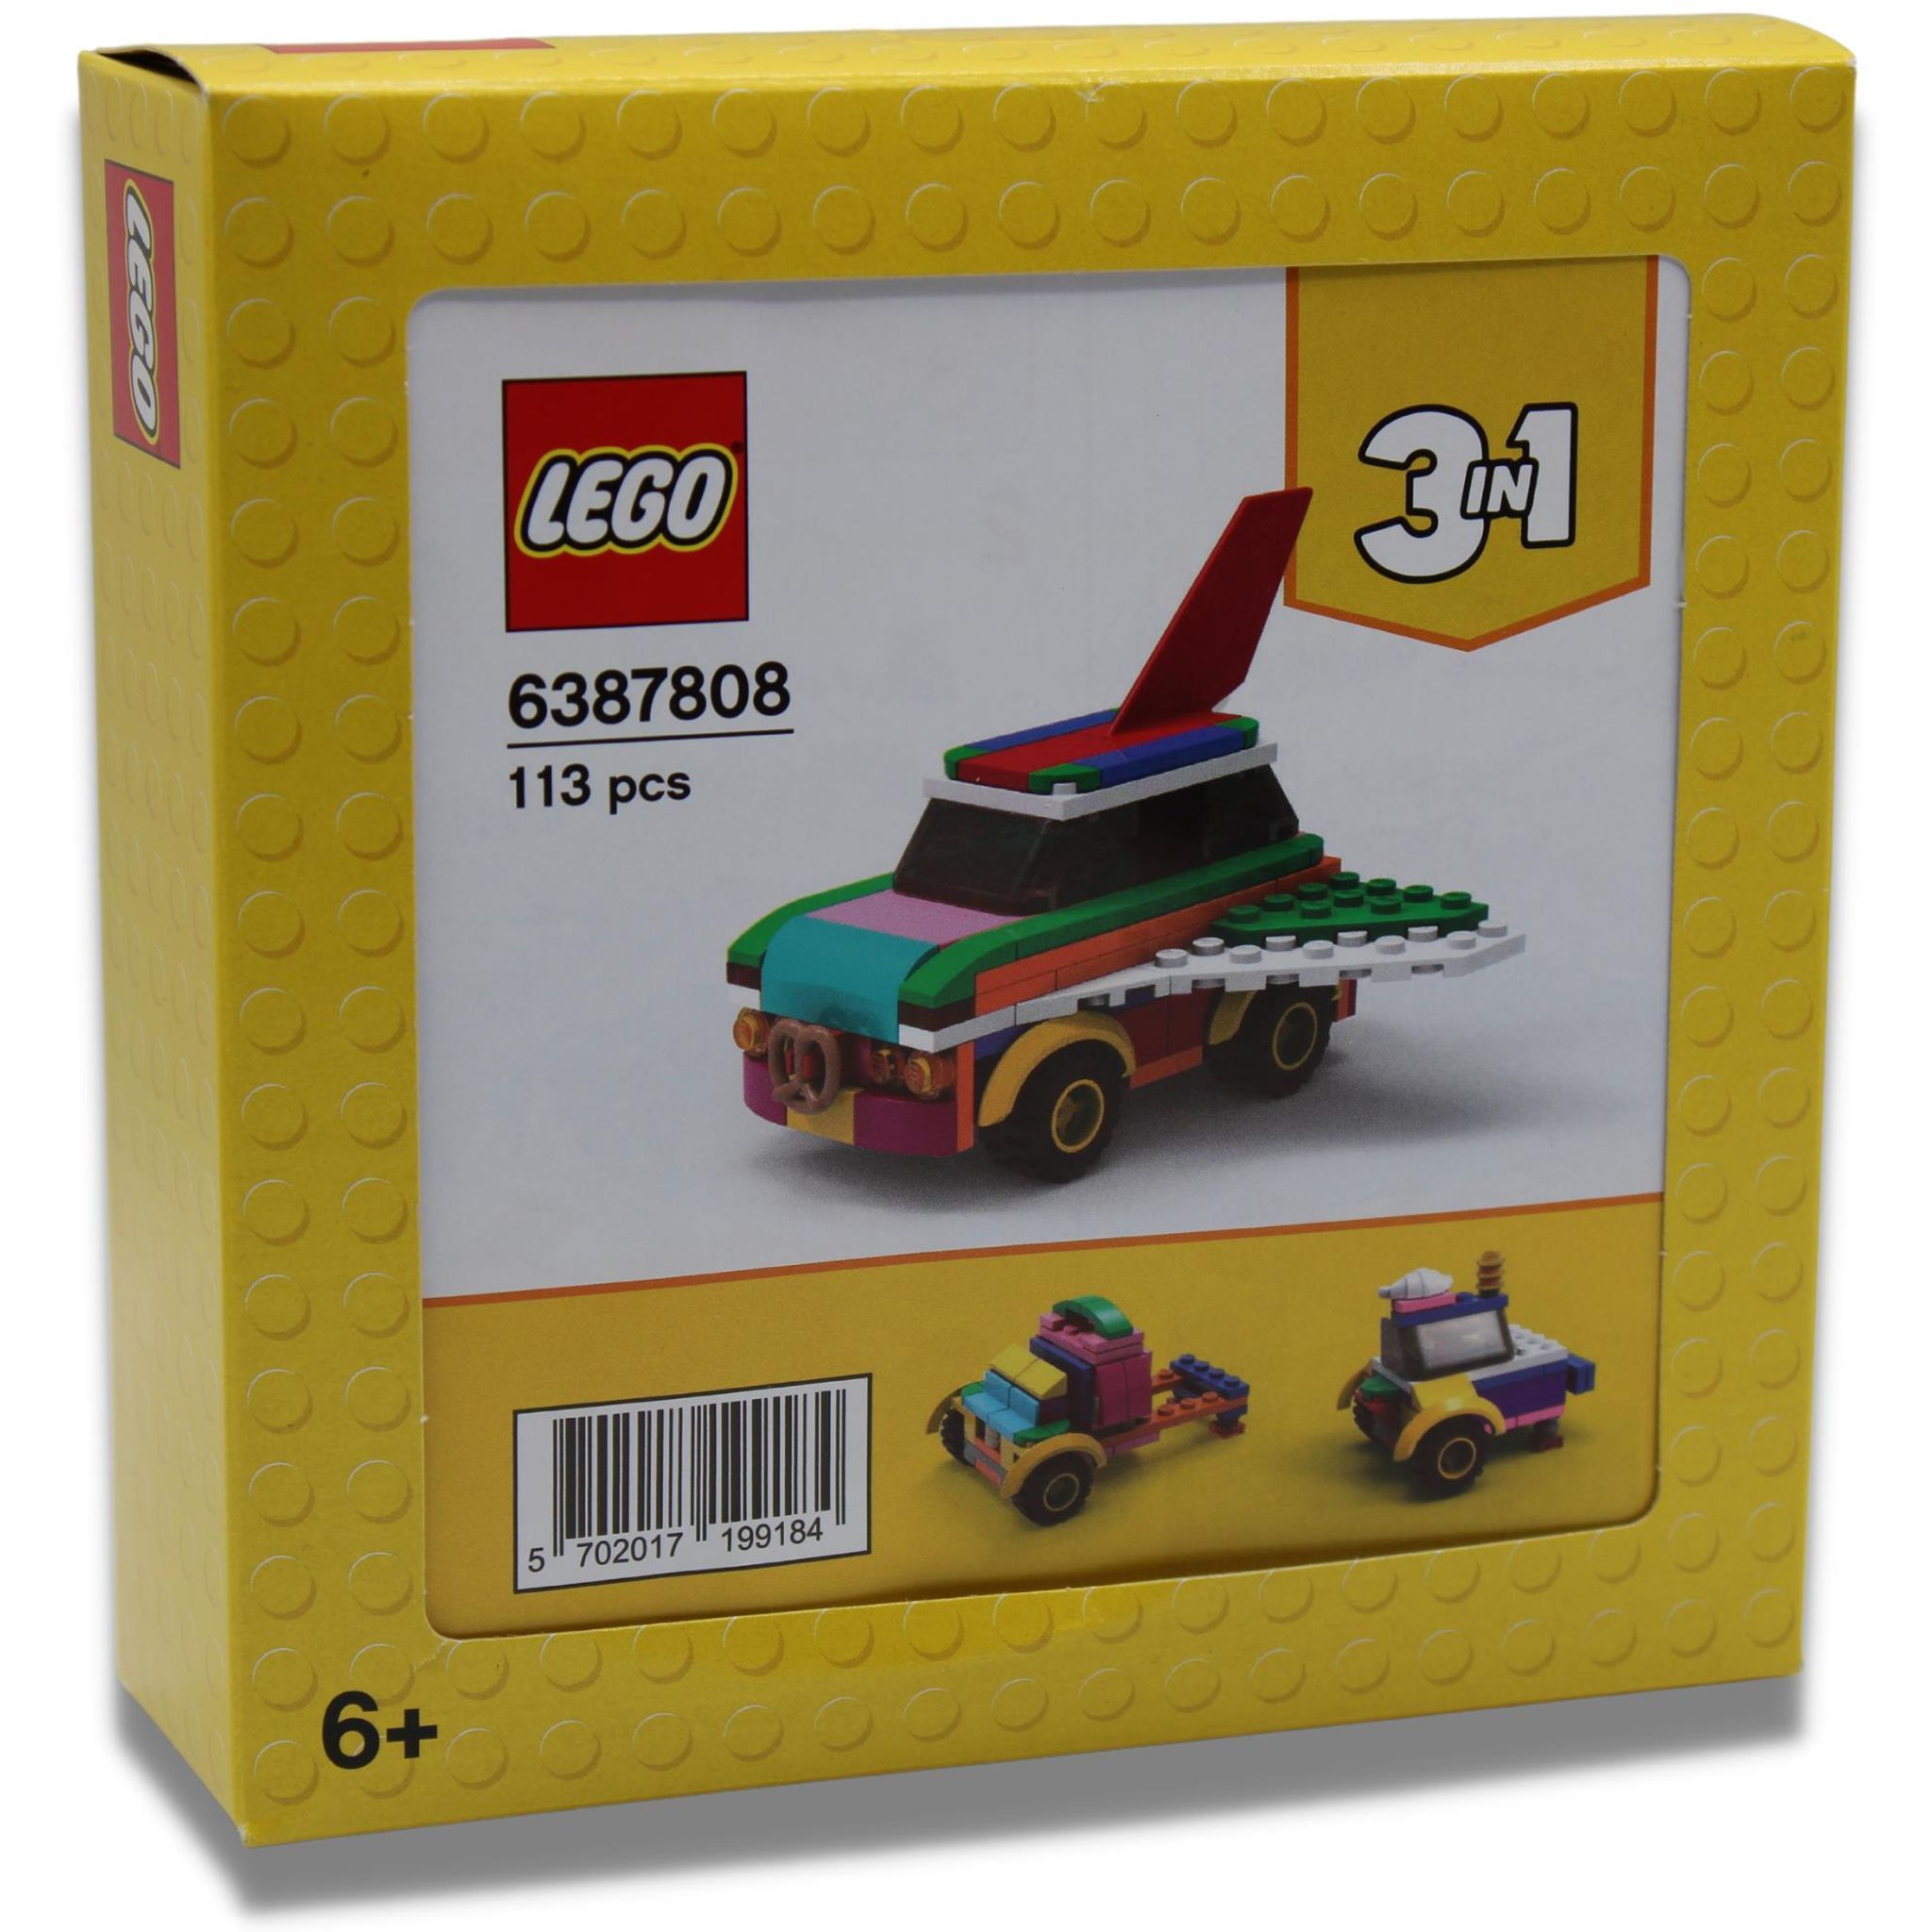 LEGO Promotional 6387808 Rebuildable Flying Car